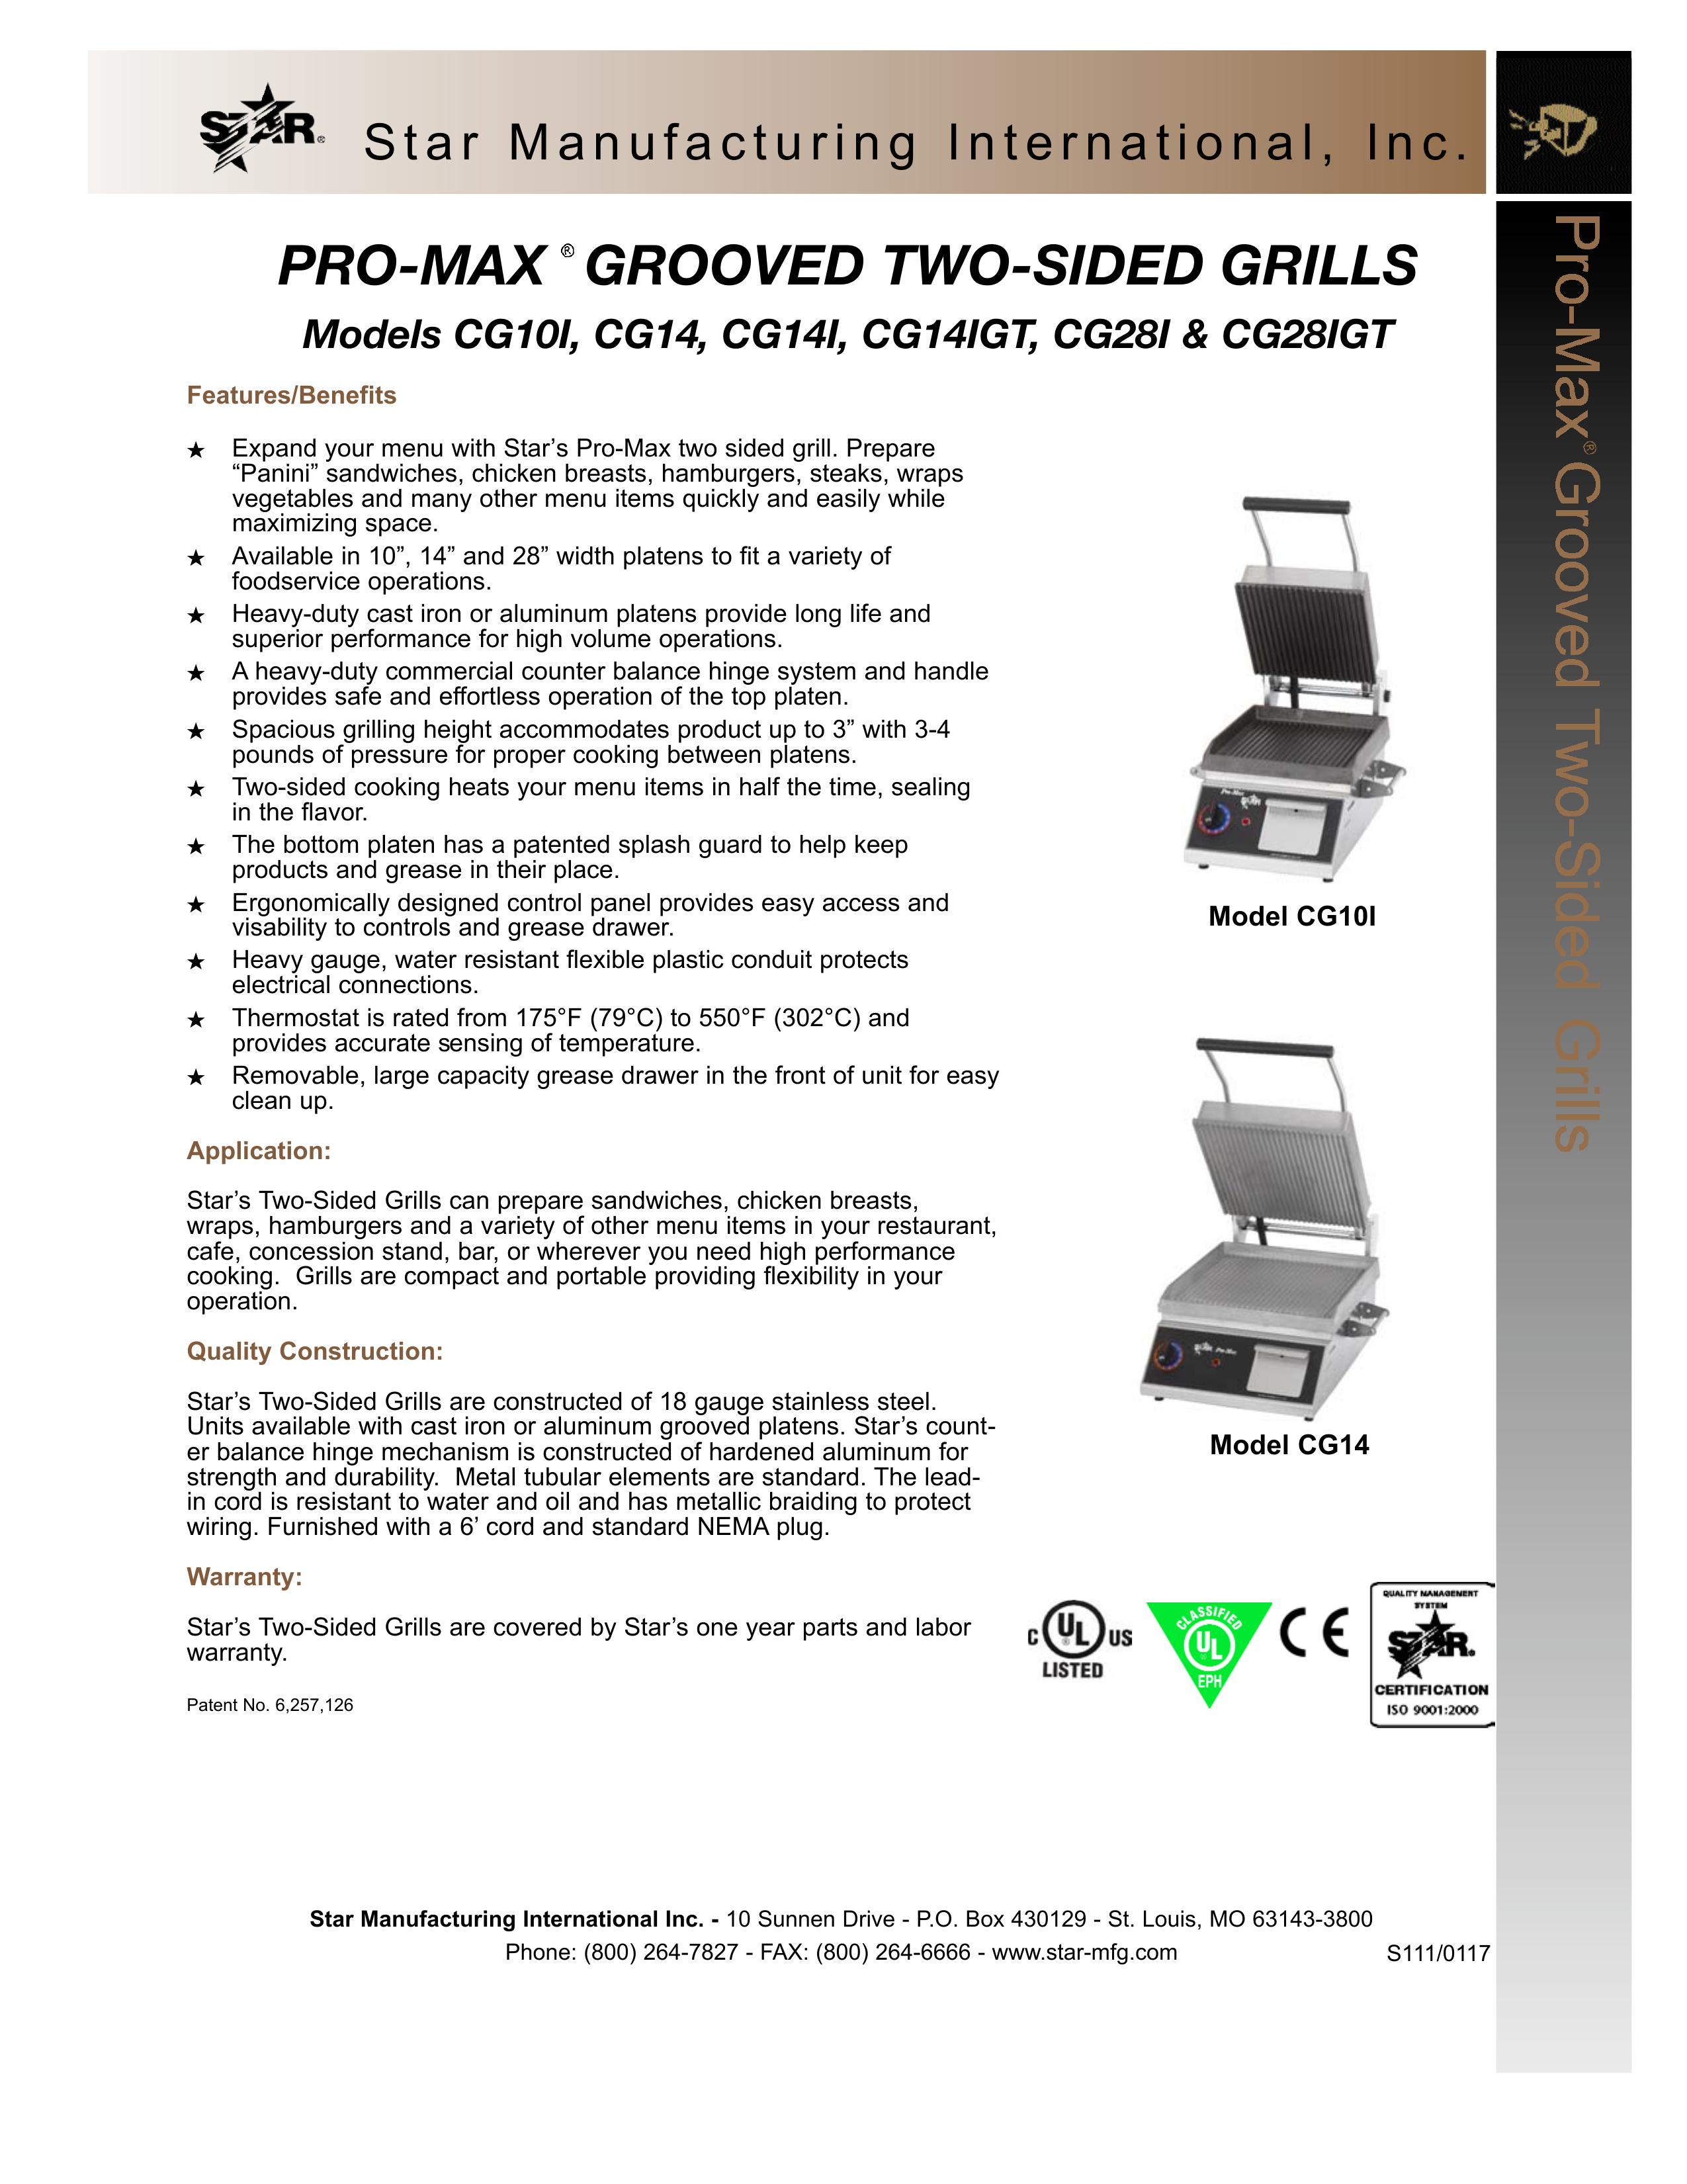 Star Manufacturing CG14IGT Electric Grill User Manual